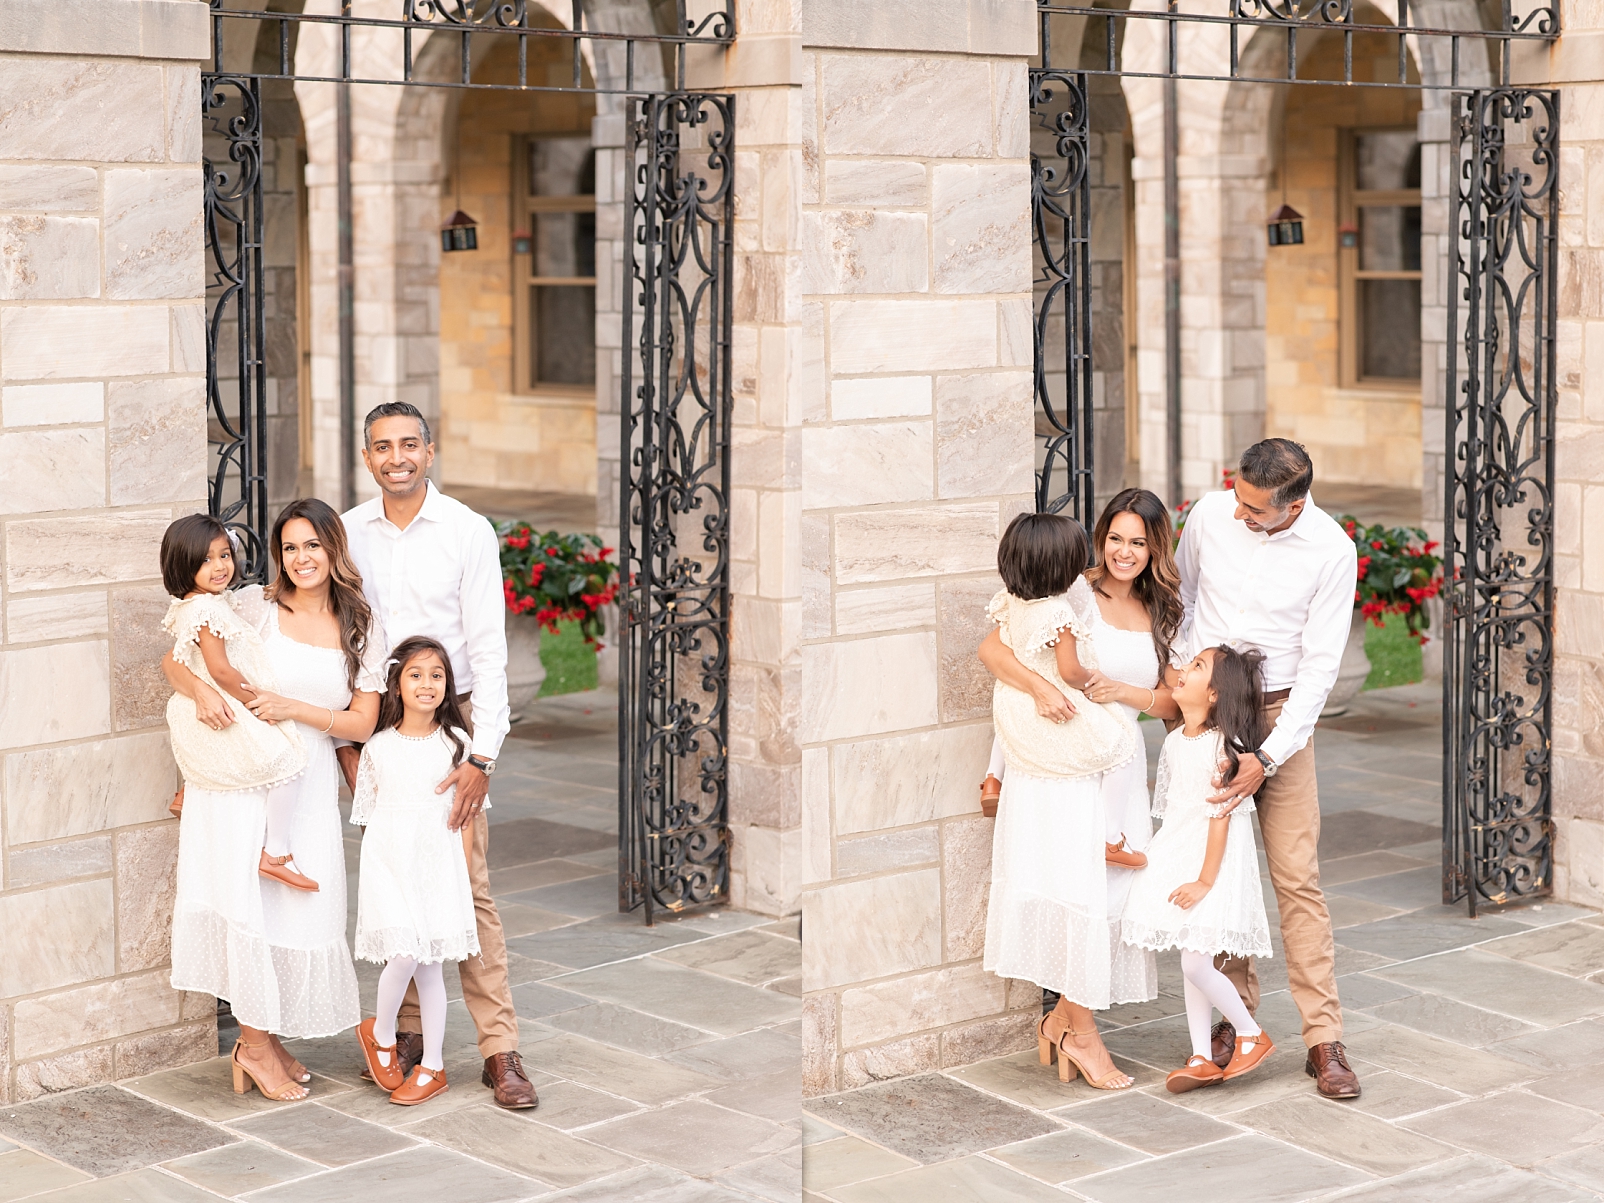 family of 4 smiling at eachother in front of the stone walls and archways